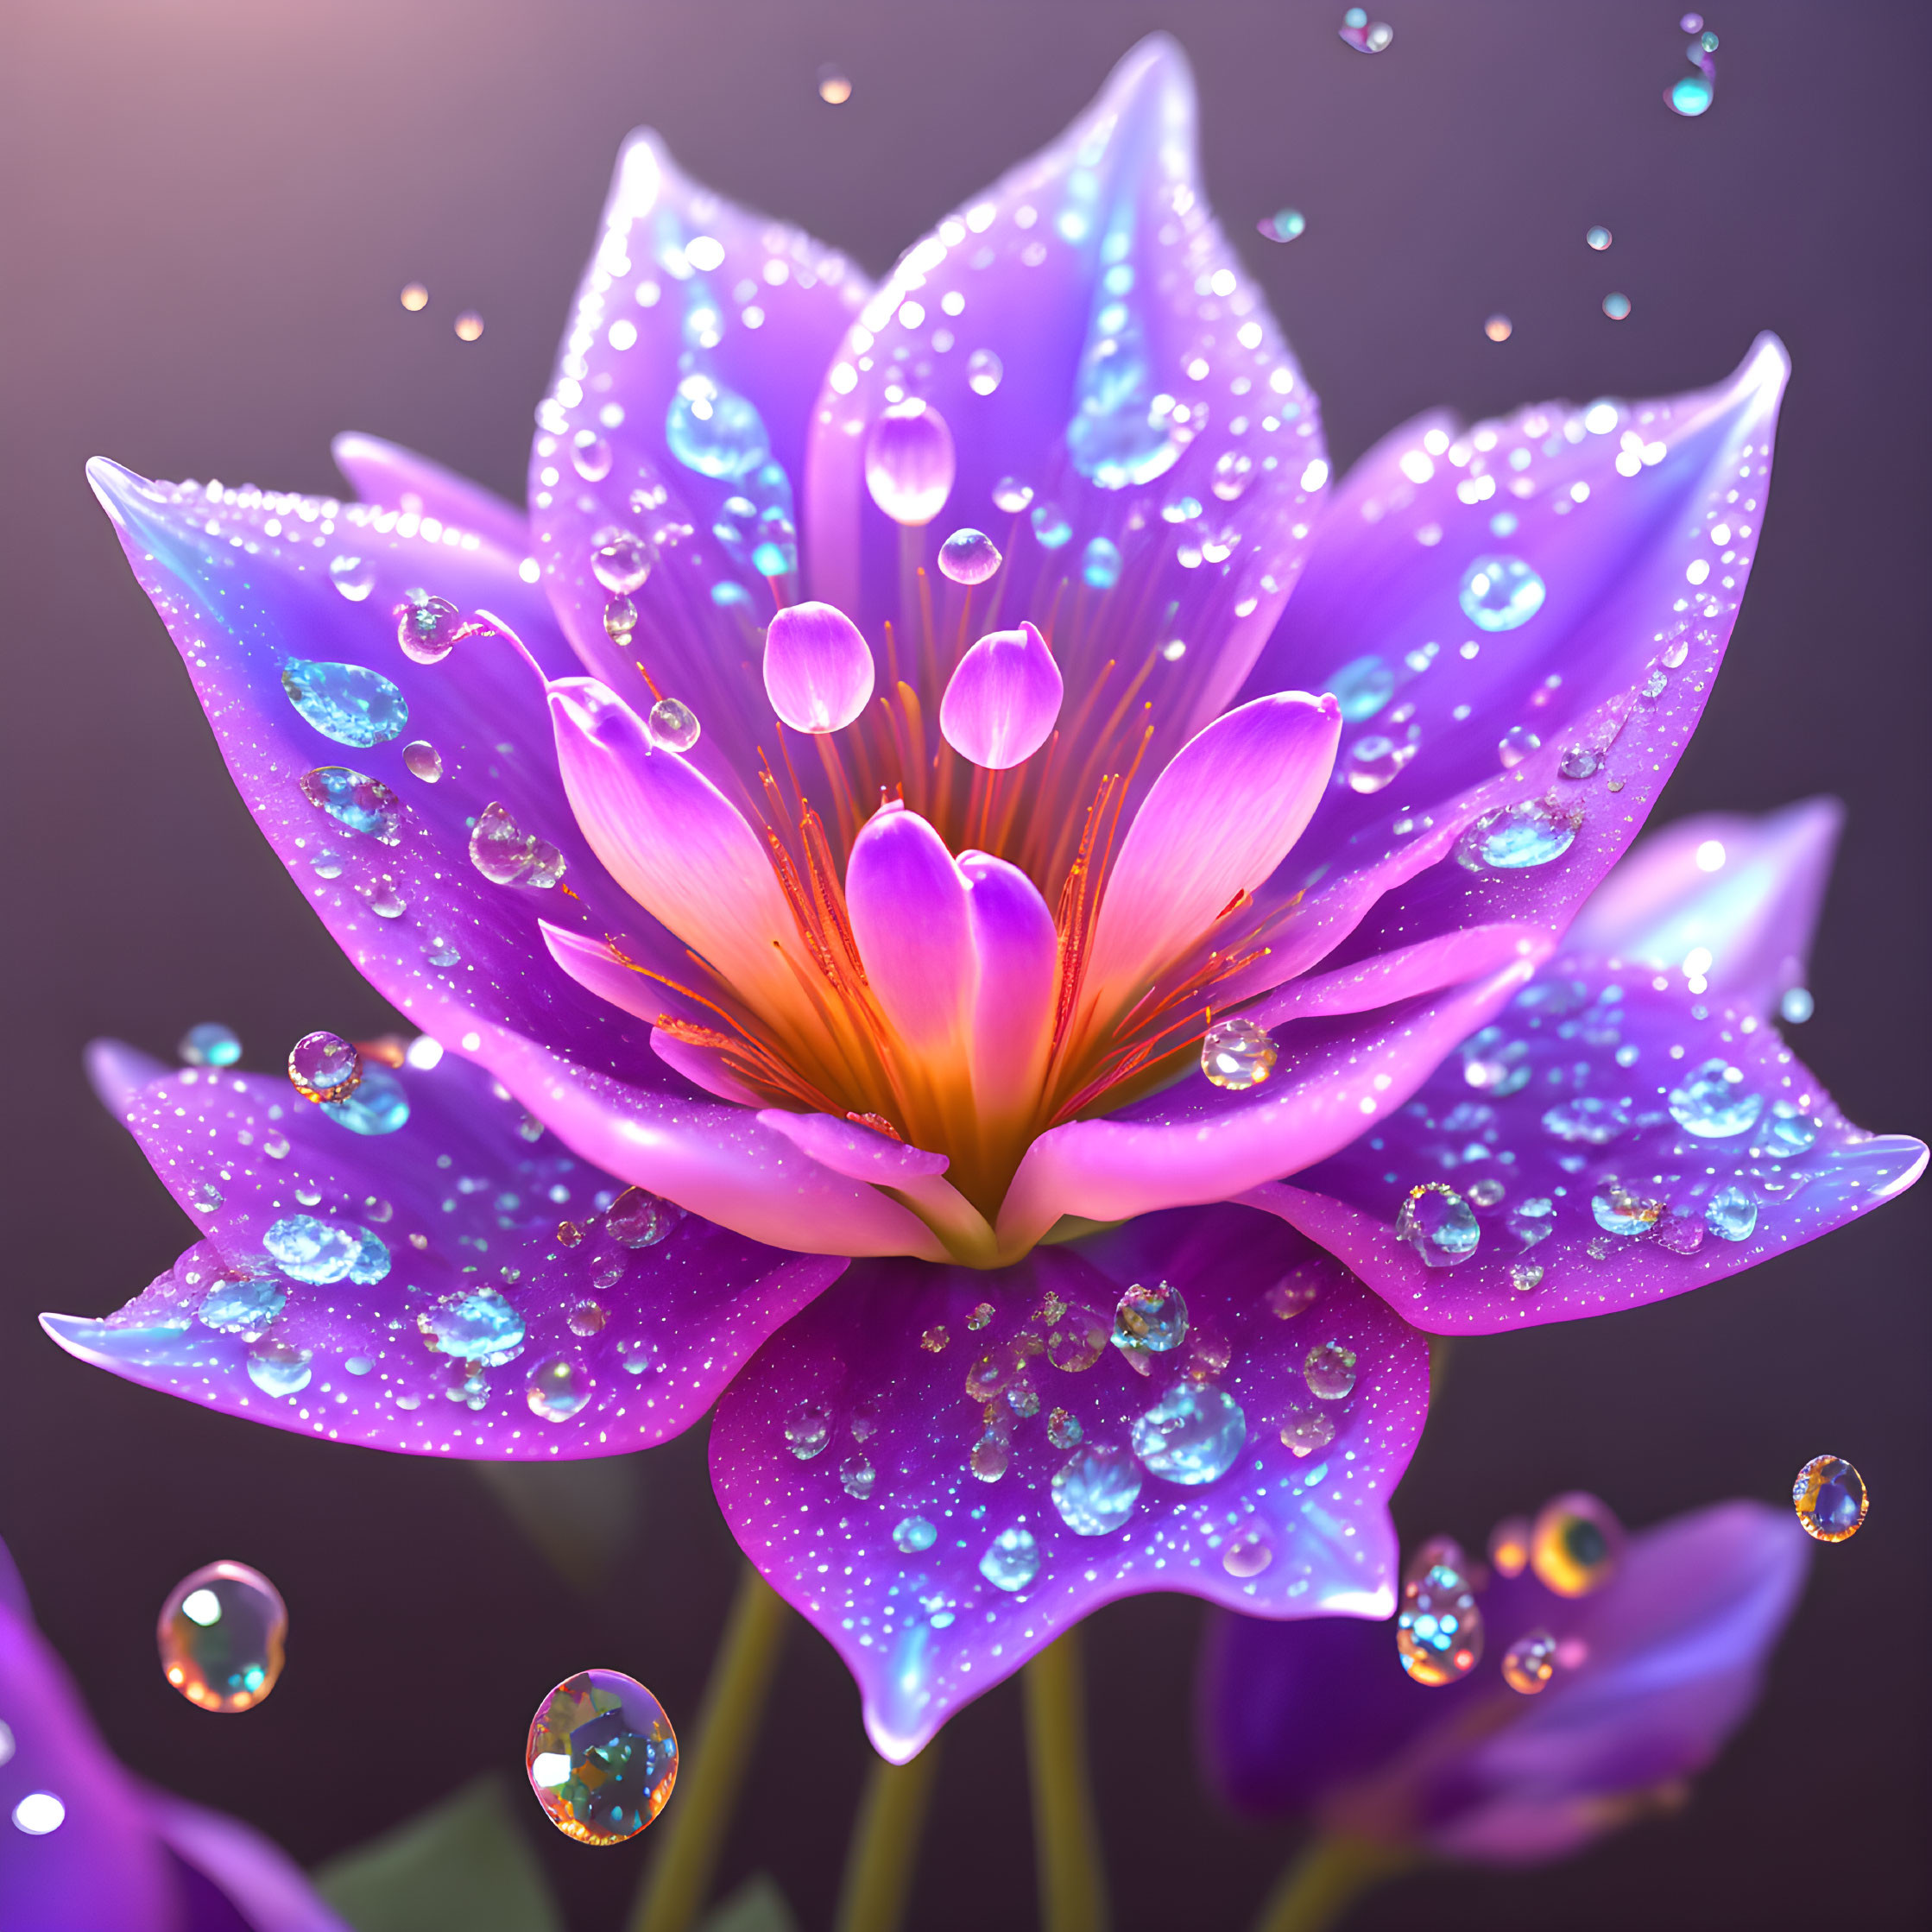 Vibrant purple flower with yellow center and water droplets on dark background